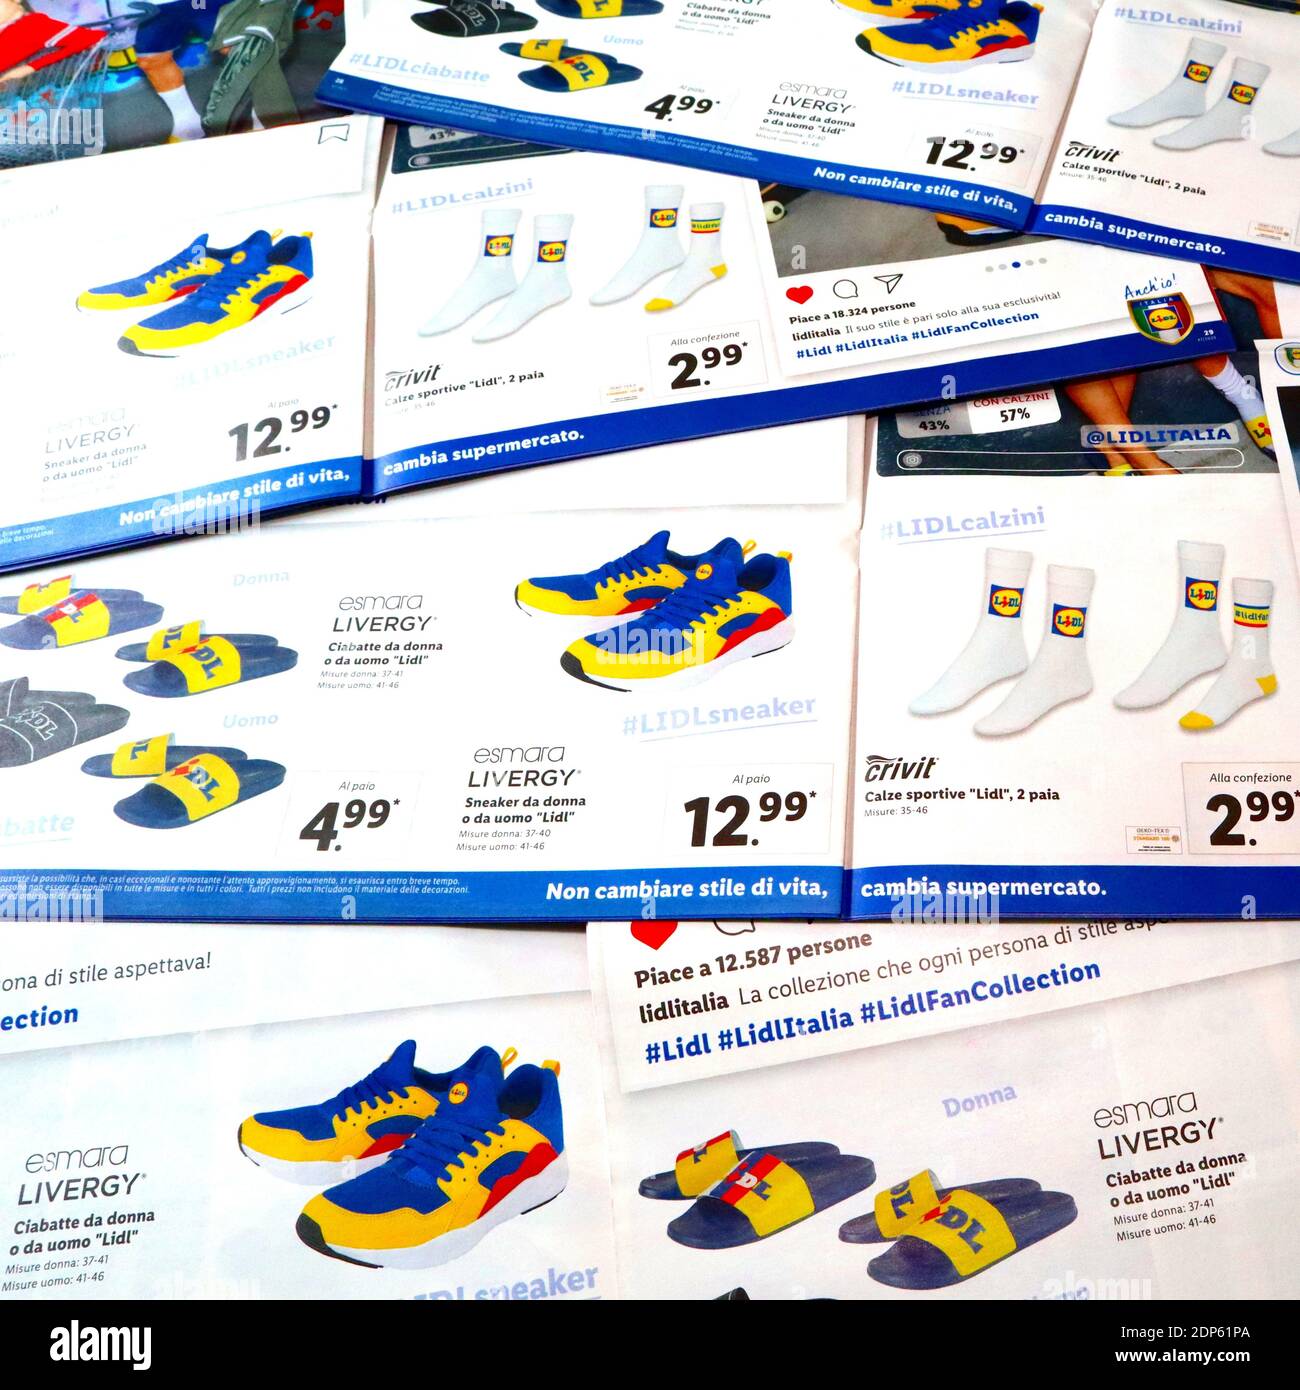 LIDL Supermarket chain Weekly Ad Flyer for Limited Edition of Sneakers,  Flip-Flops, Socks and T-Shirts Stock Photo - Alamy